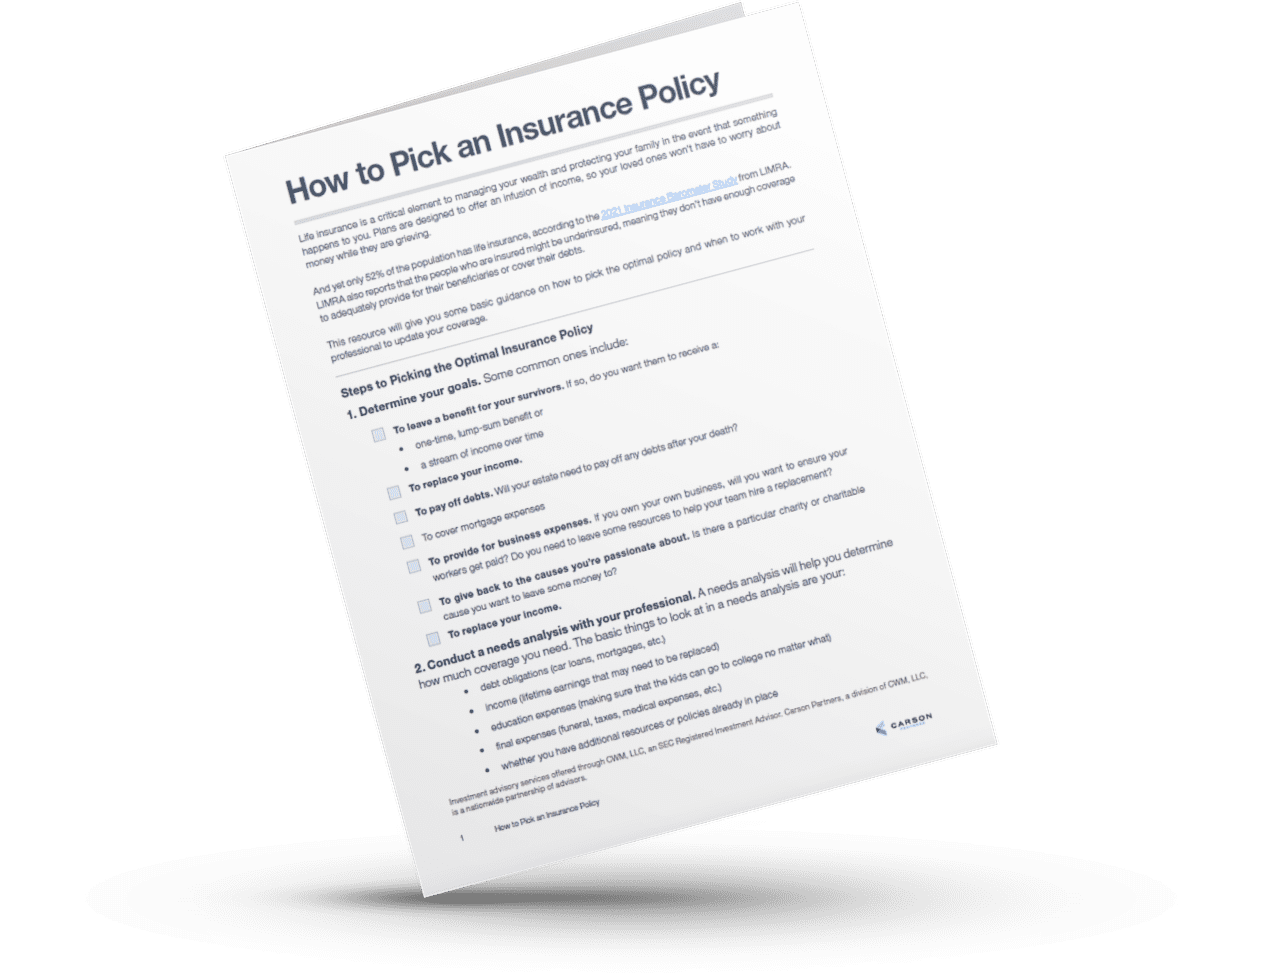 How to Pick an Insurance Policy